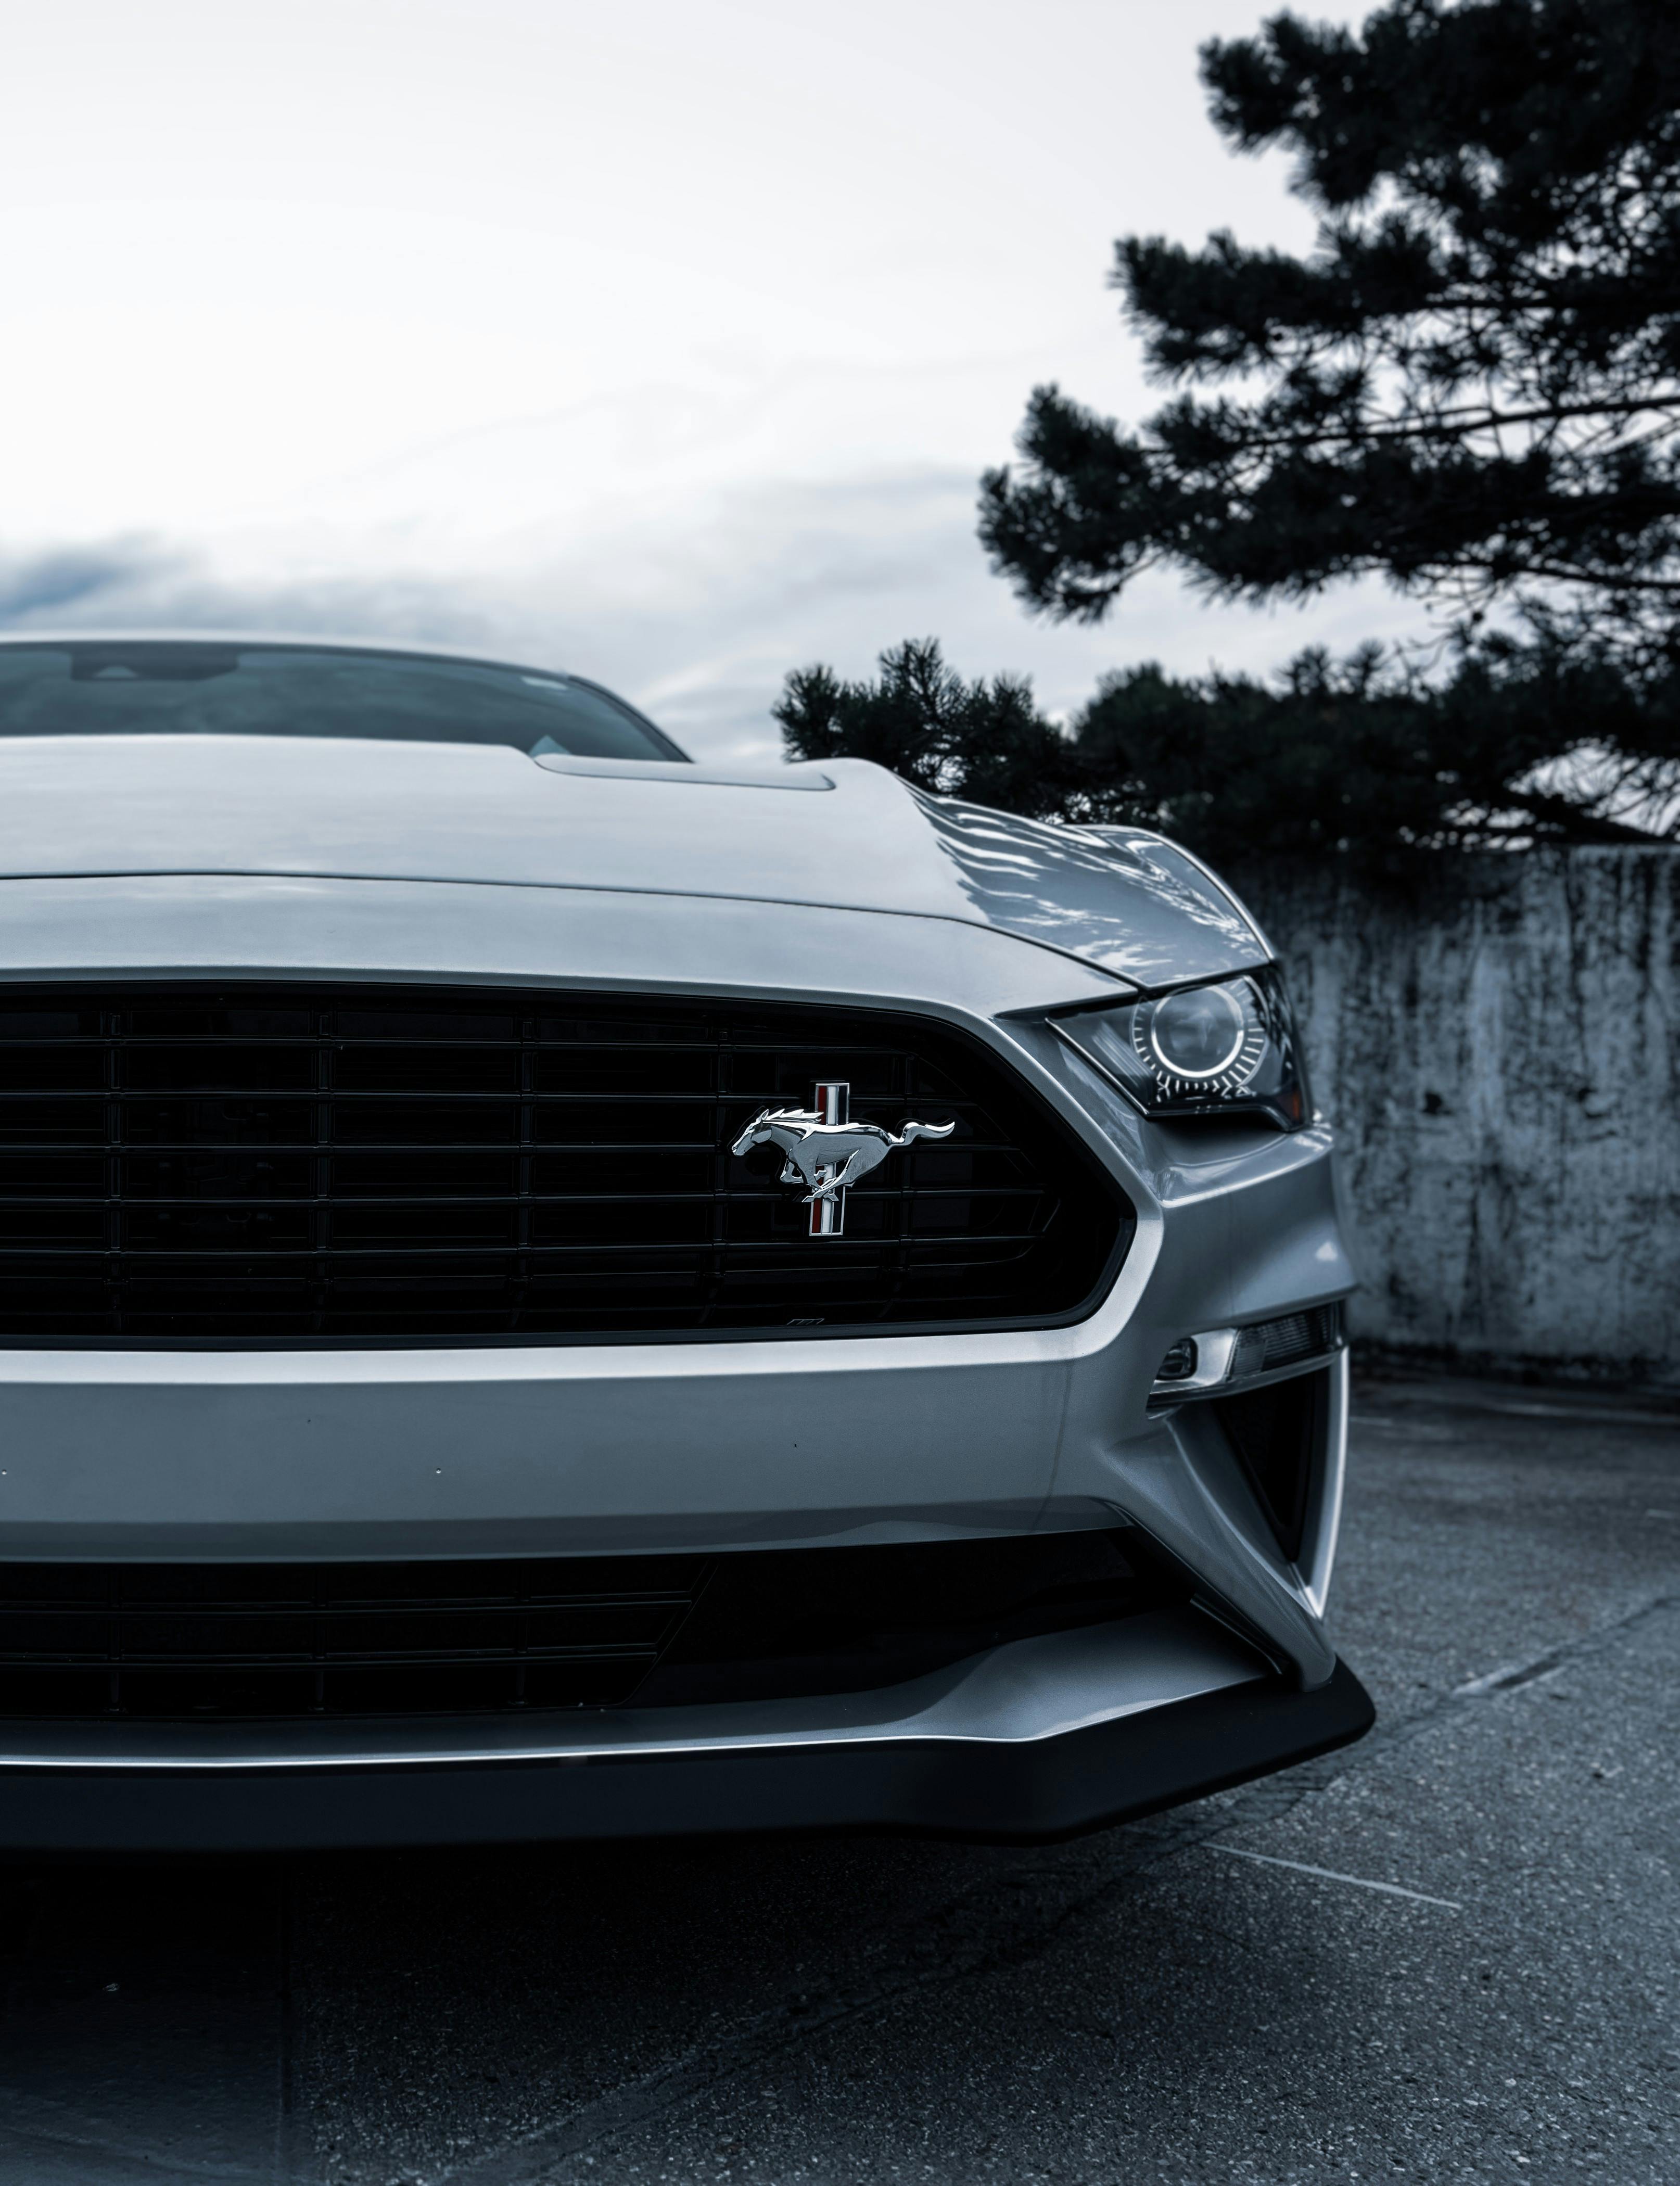 Close Up Photo of a Silver Ford Mustang · Free Stock Photo